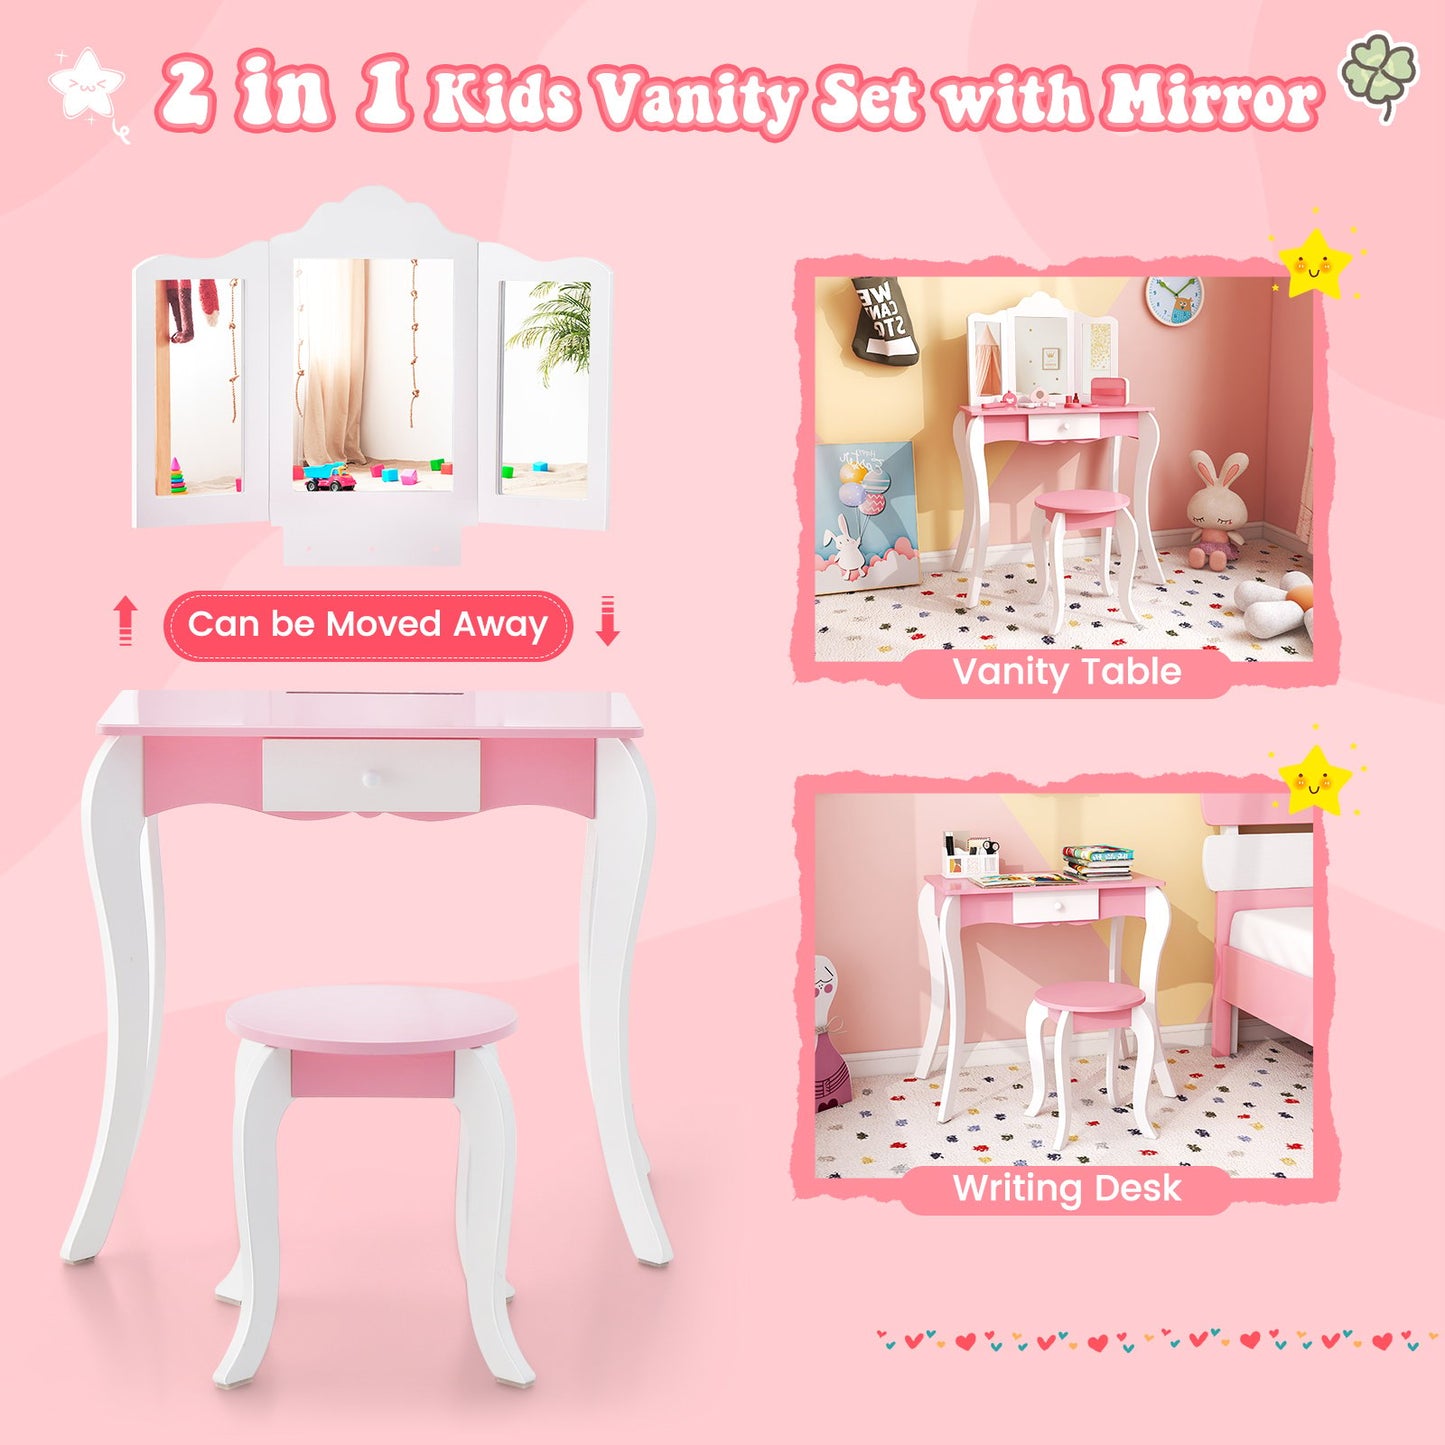 Kid's Wooden Vanity Table and Stool Set  with 3-Panel Acrylic Mirror, White